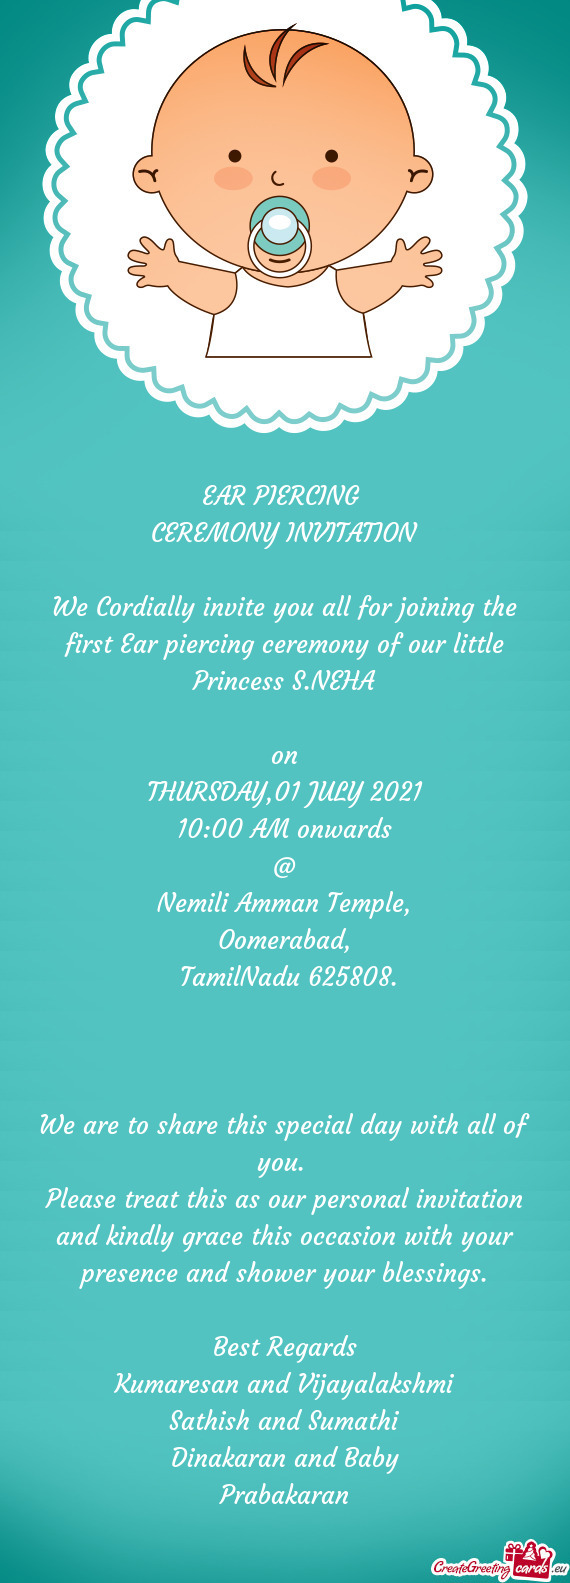 We Cordially invite you all for joining the first Ear piercing ceremony of our little Princess S.NEH